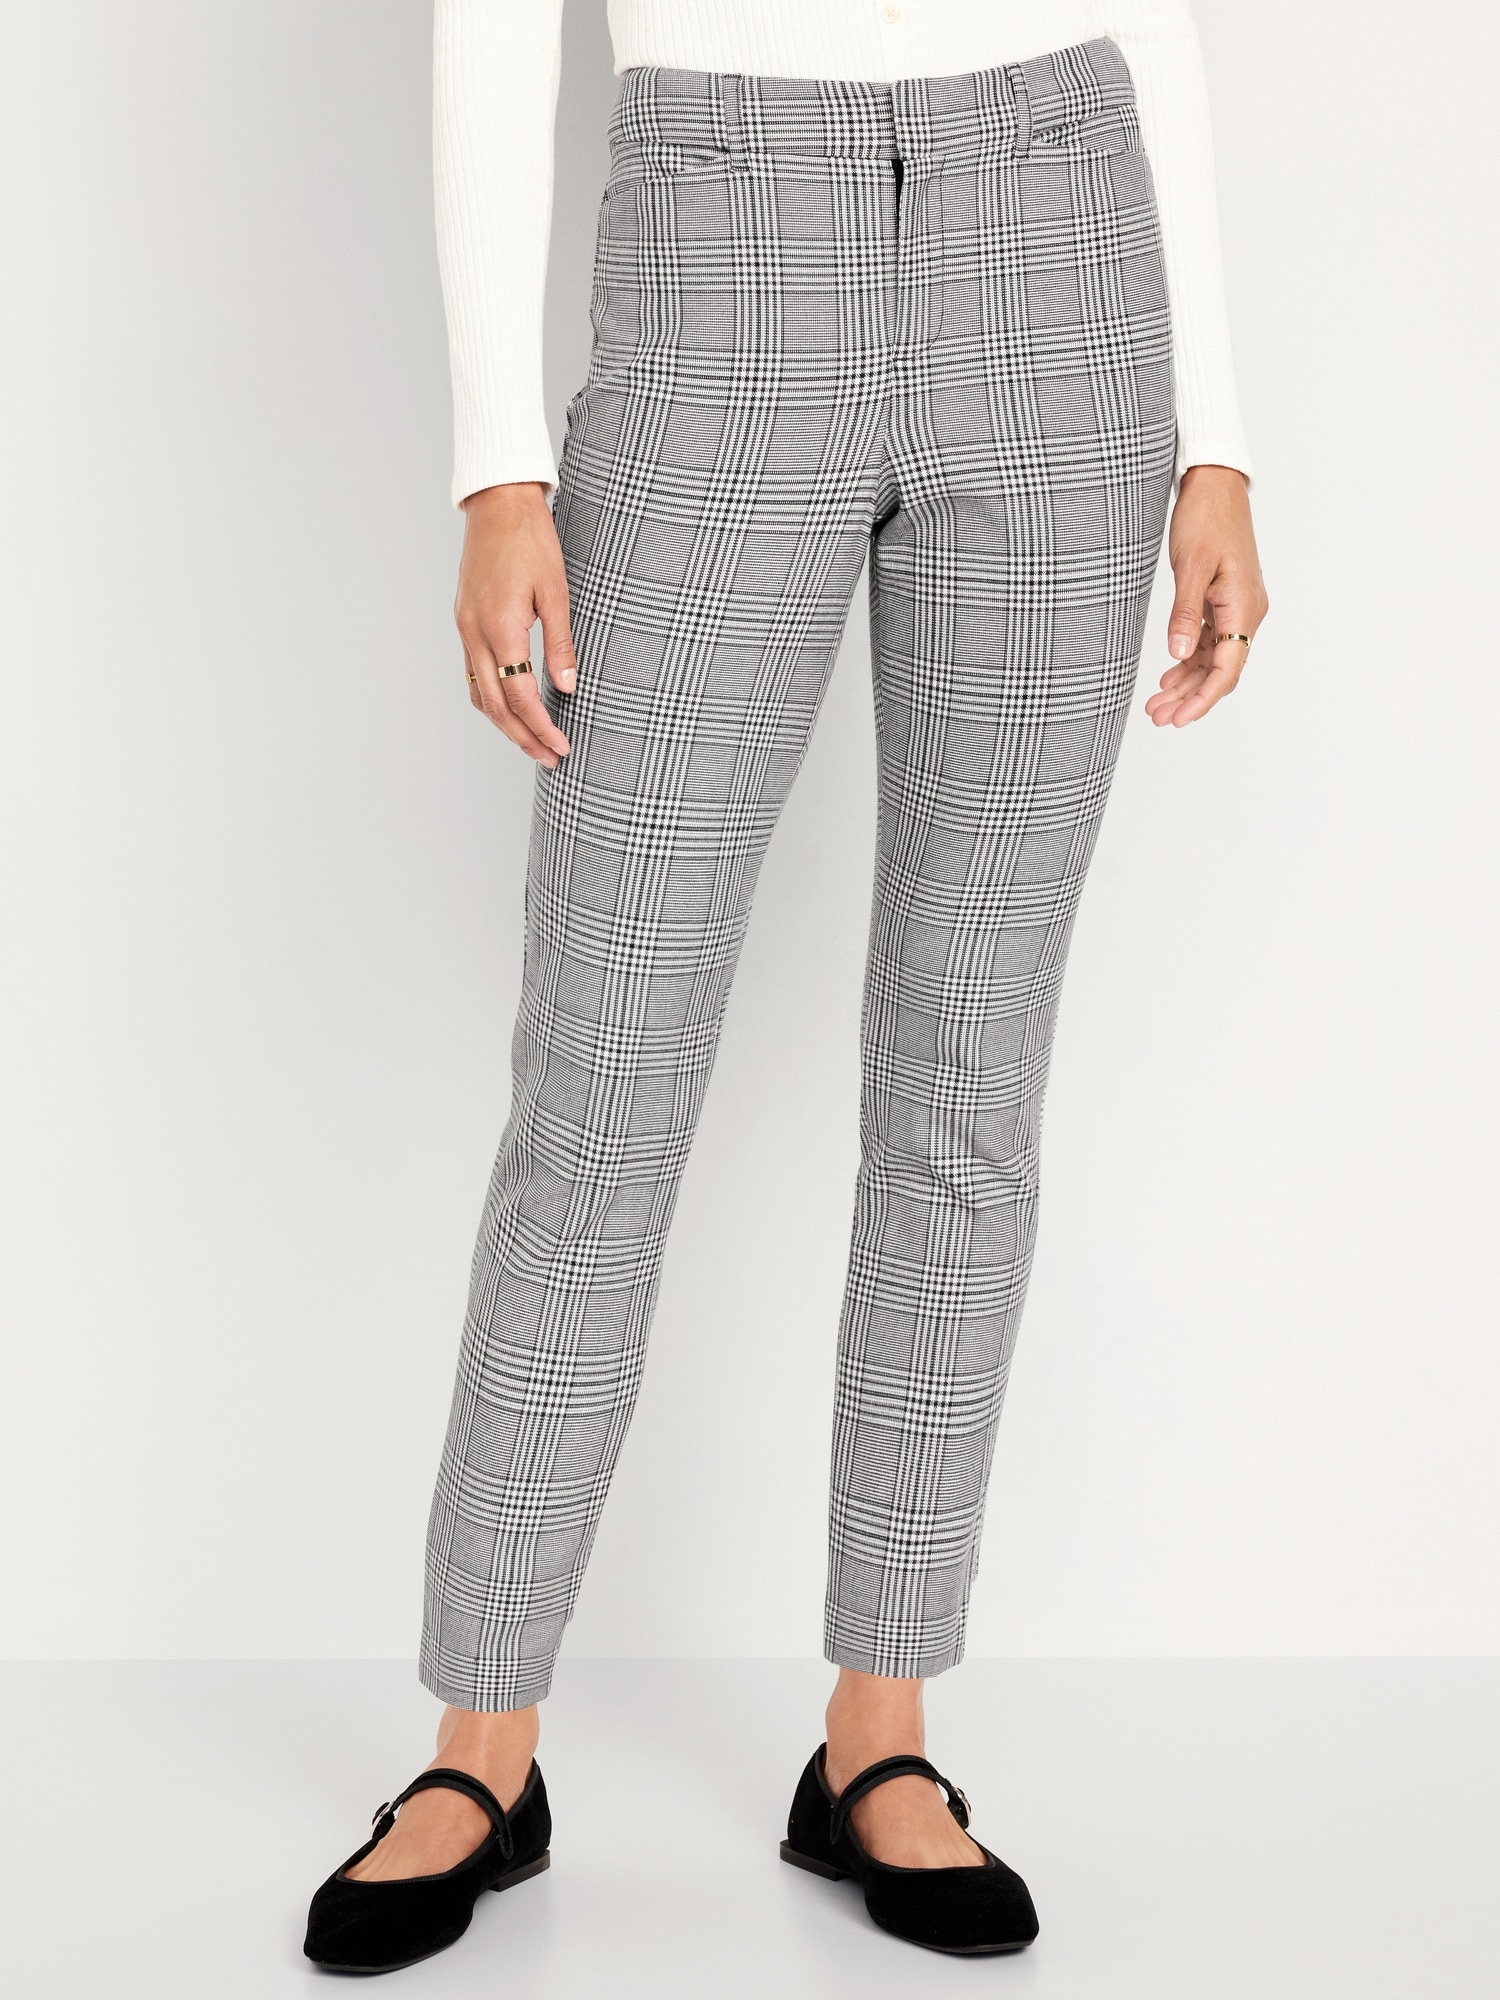 Ankle Length Mens Trousers - Buy Ankle Length Mens Trousers Online at Best  Prices In India | Flipkart.com